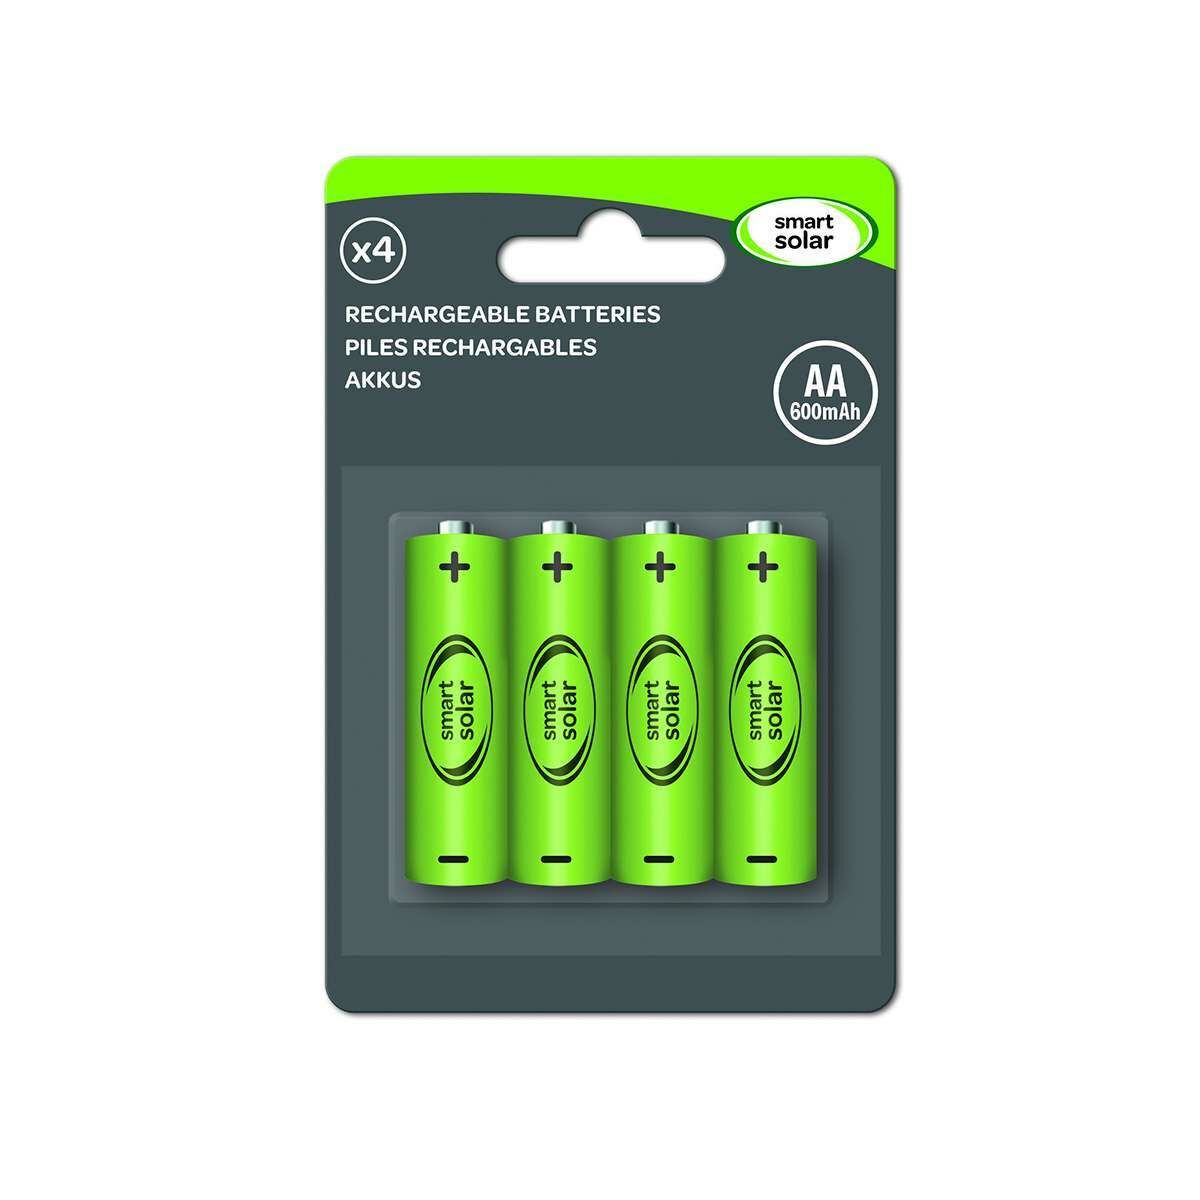 Solar Rechargeable Batteries, AA, 600 mAh, 1.2v, 4 Pack image 1